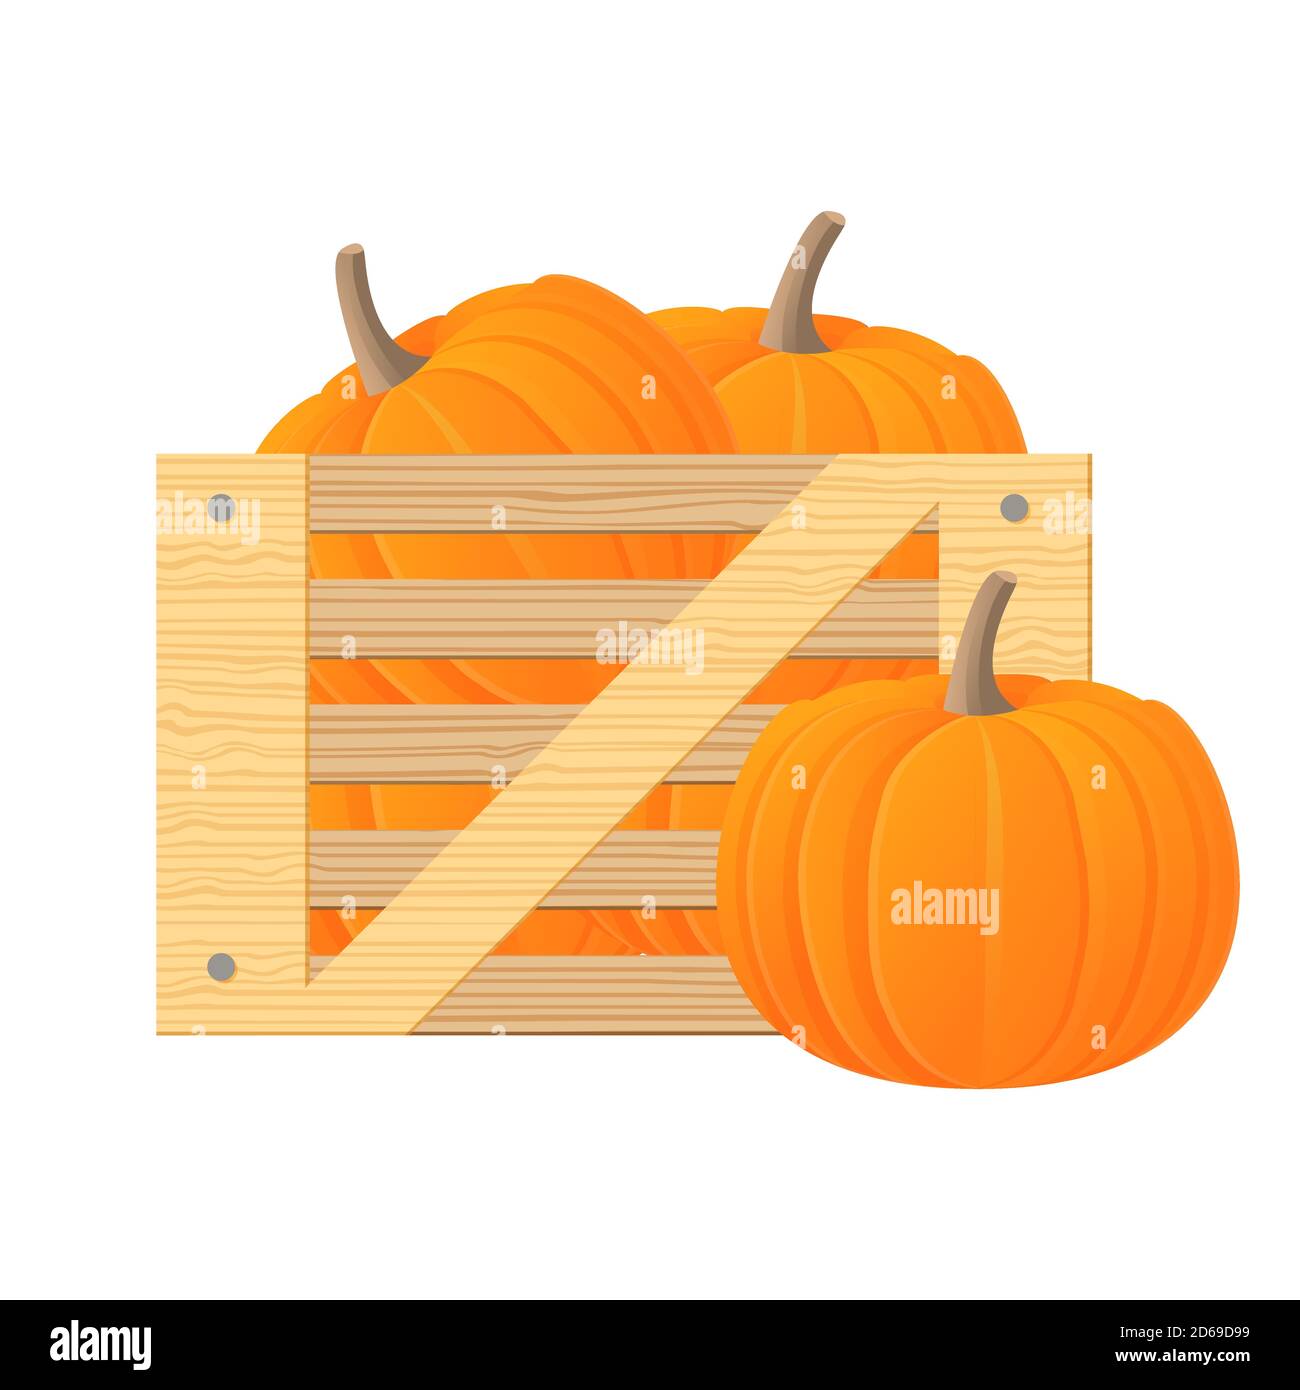 Wooden box with pumpkin. Harvesting vegetables. Healthy eating. Stock Vector